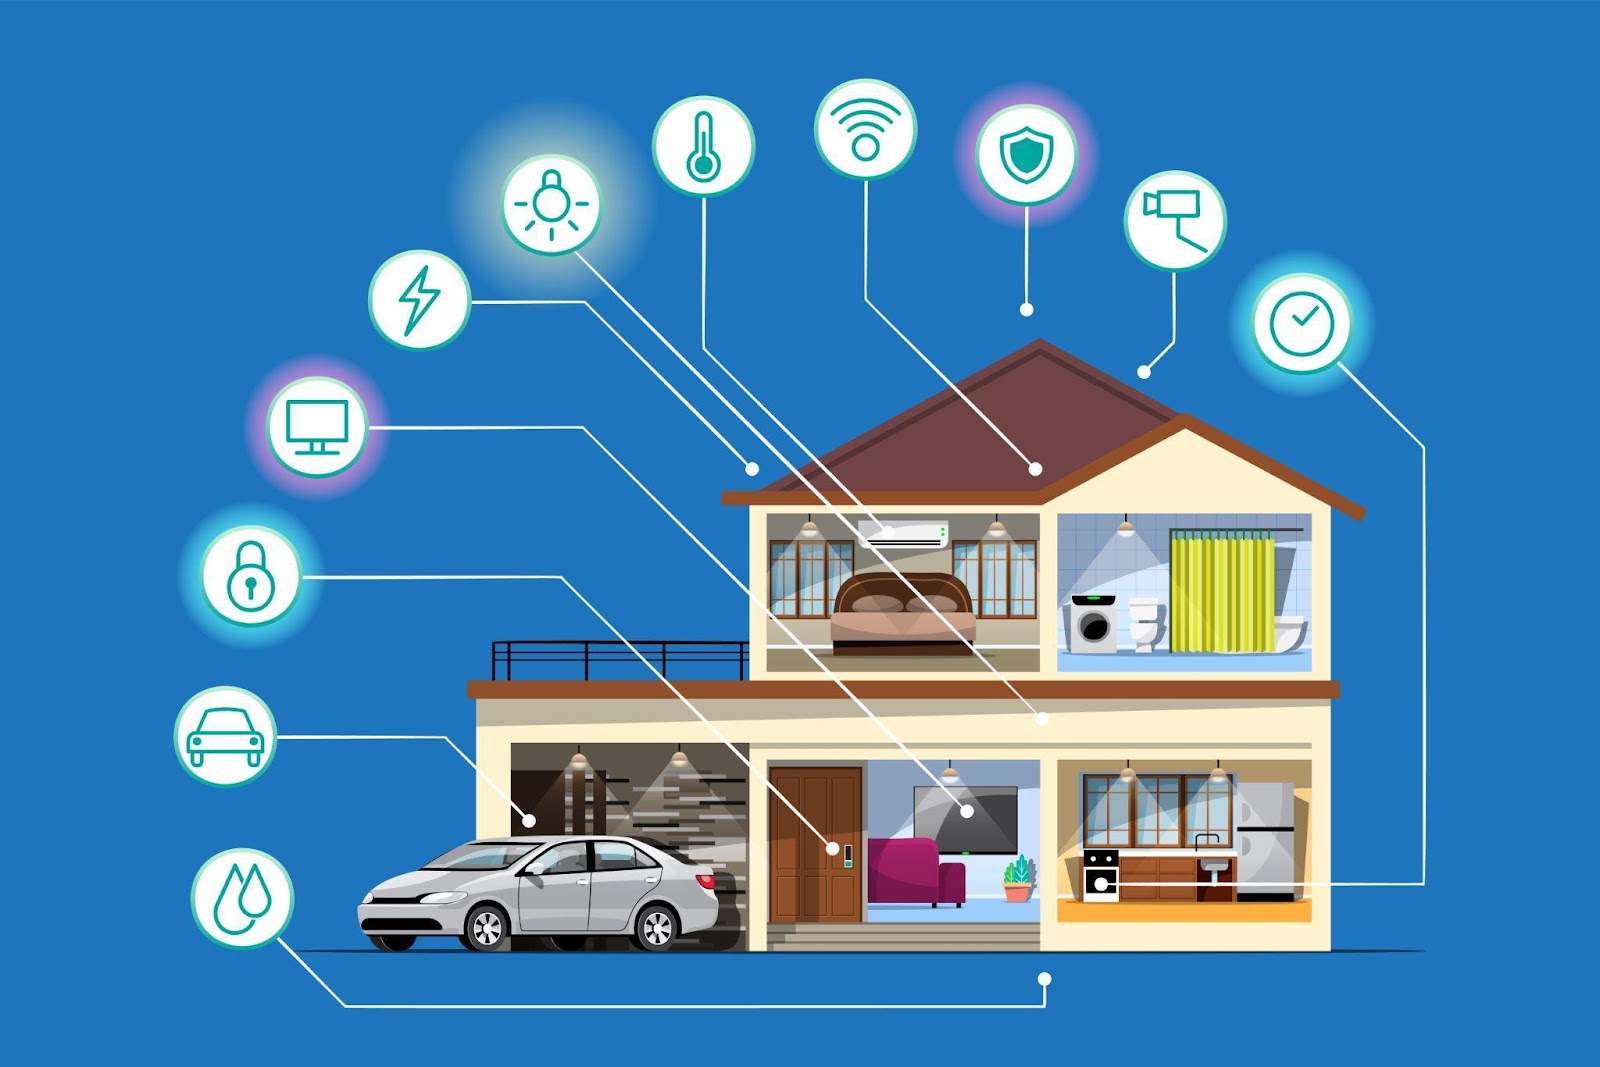 Image illustrating Home Automation System for your home